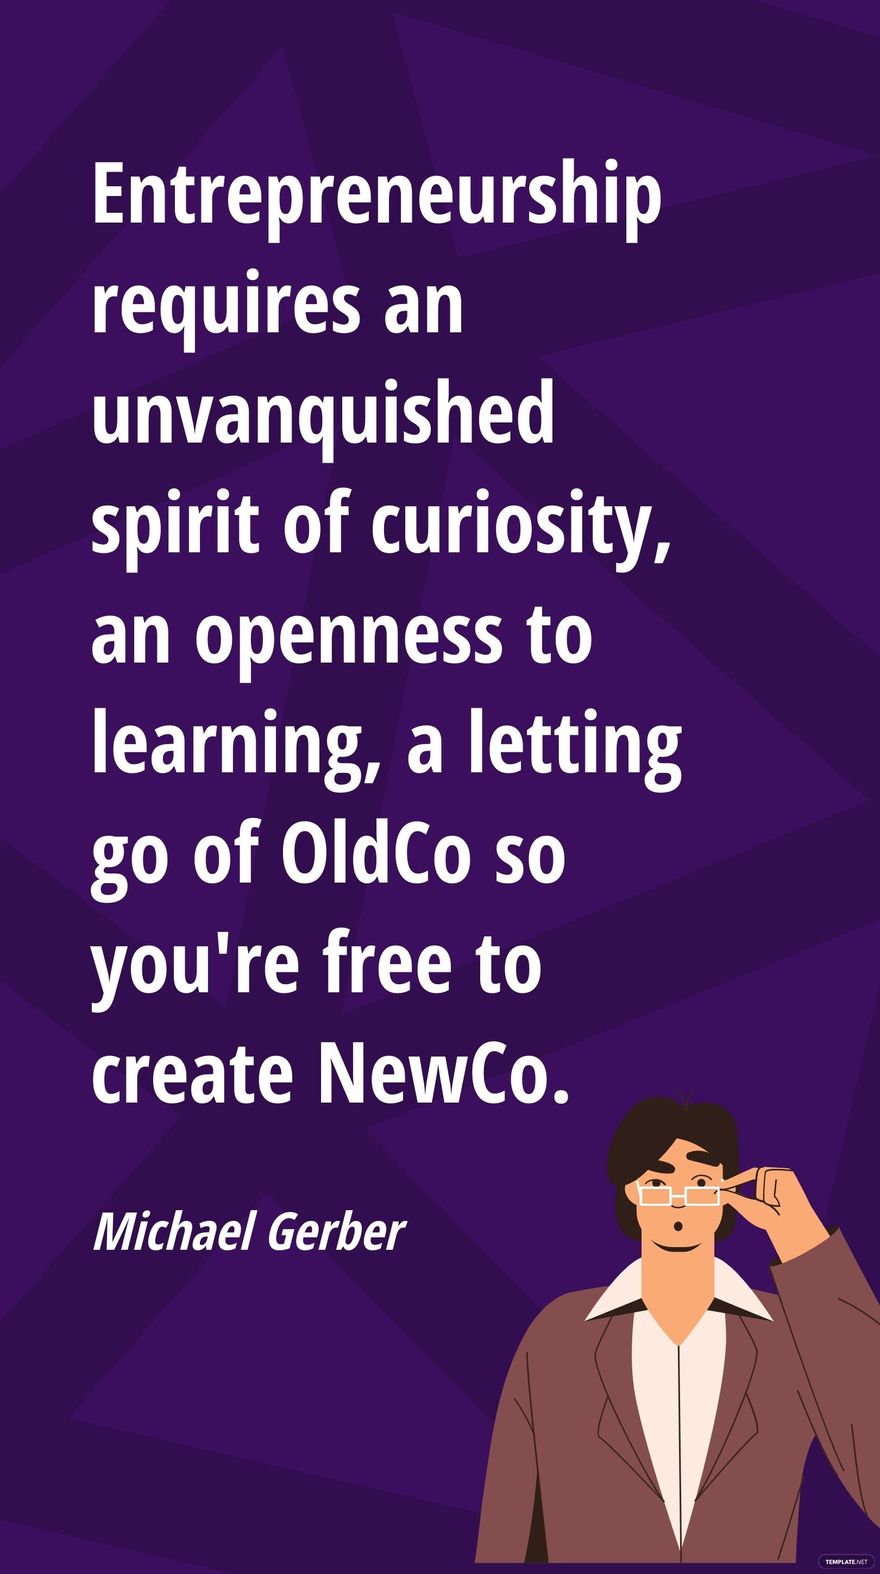 Michael Gerber - Entrepreneurship requires an unvanquished spirit of curiosity, an openness to learning, a letting go of OldCo so you're to create NewCo. in JPG